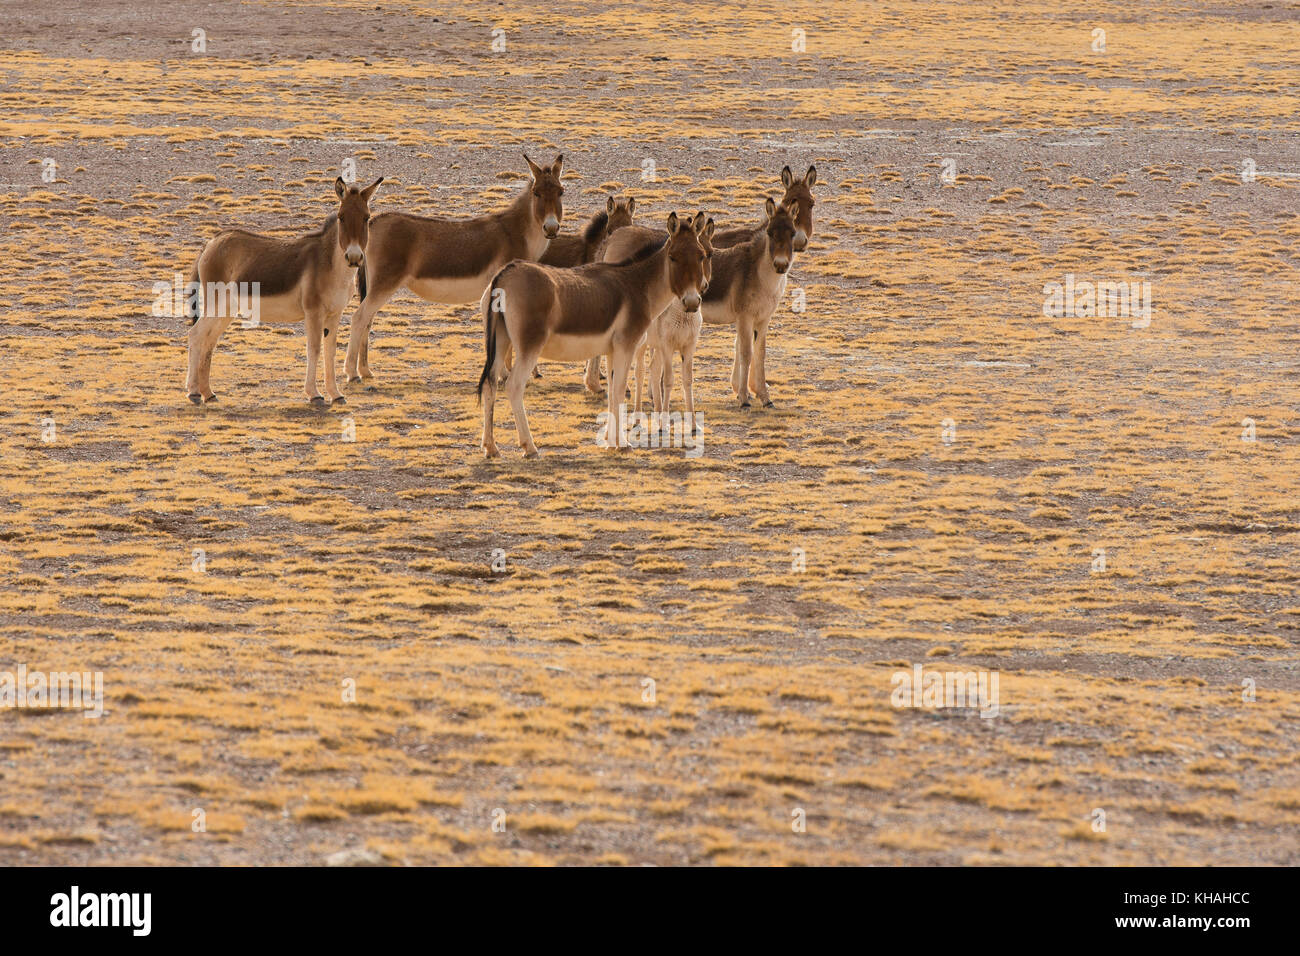 A herd of Kiang or (Equus kiang) in dry steppe, Changtang plateau, Northern Tibet, Tibet, China Stock Photo